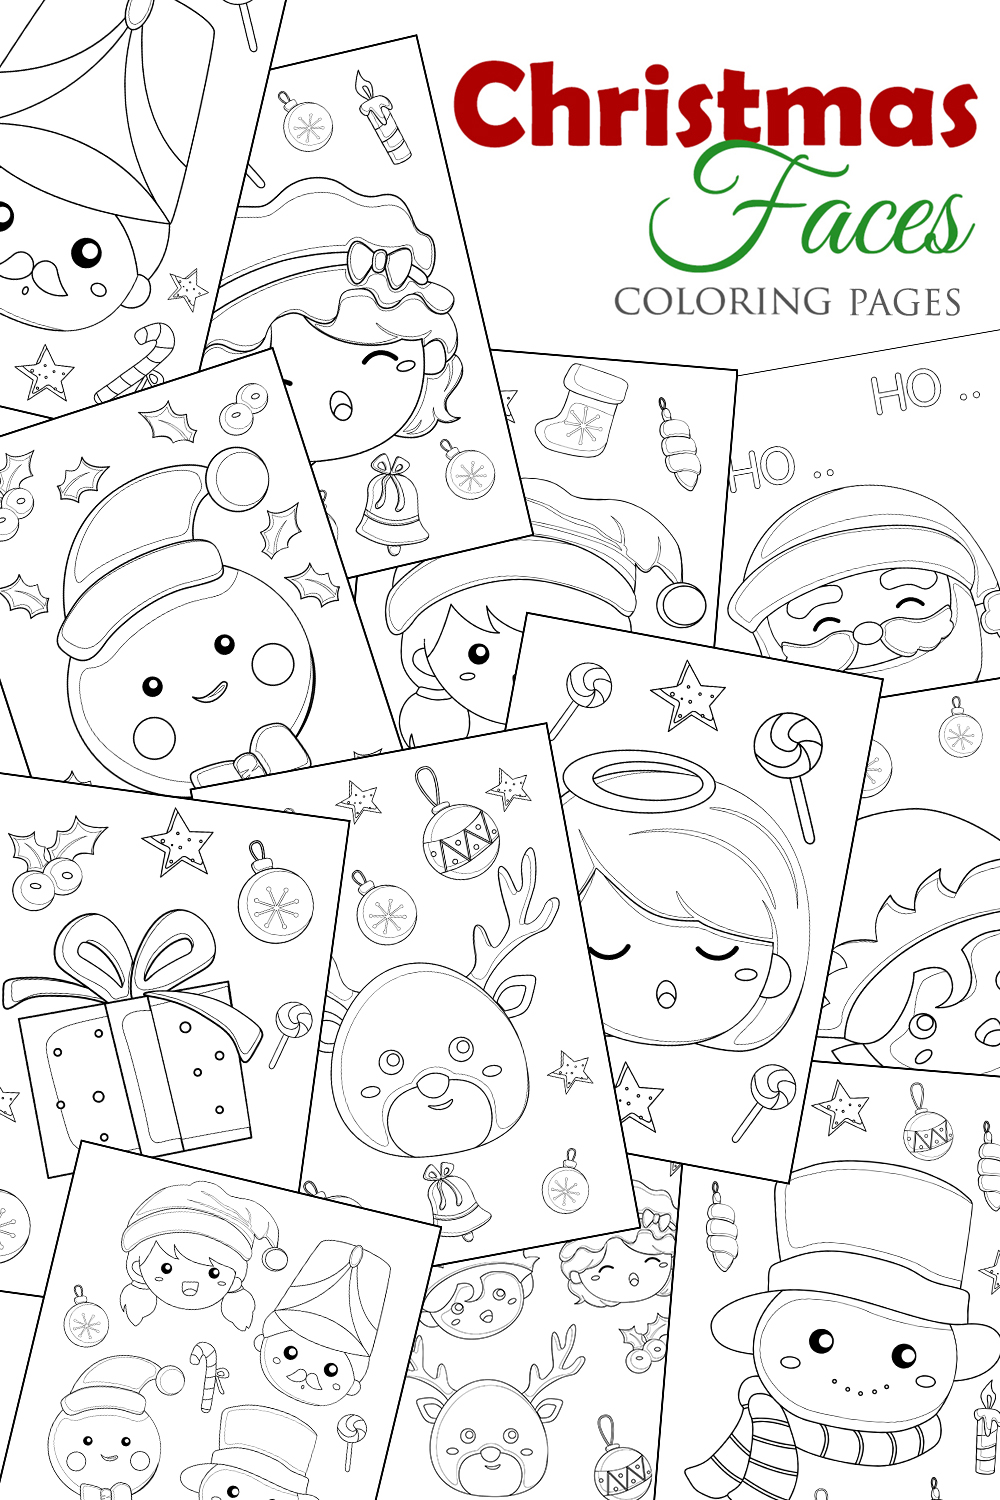 Cute Christmas Faces Elf Snowman Deer Animal Girl Kids Angel Cartoon Coloring Pages for Kids and Adult pinterest preview image.